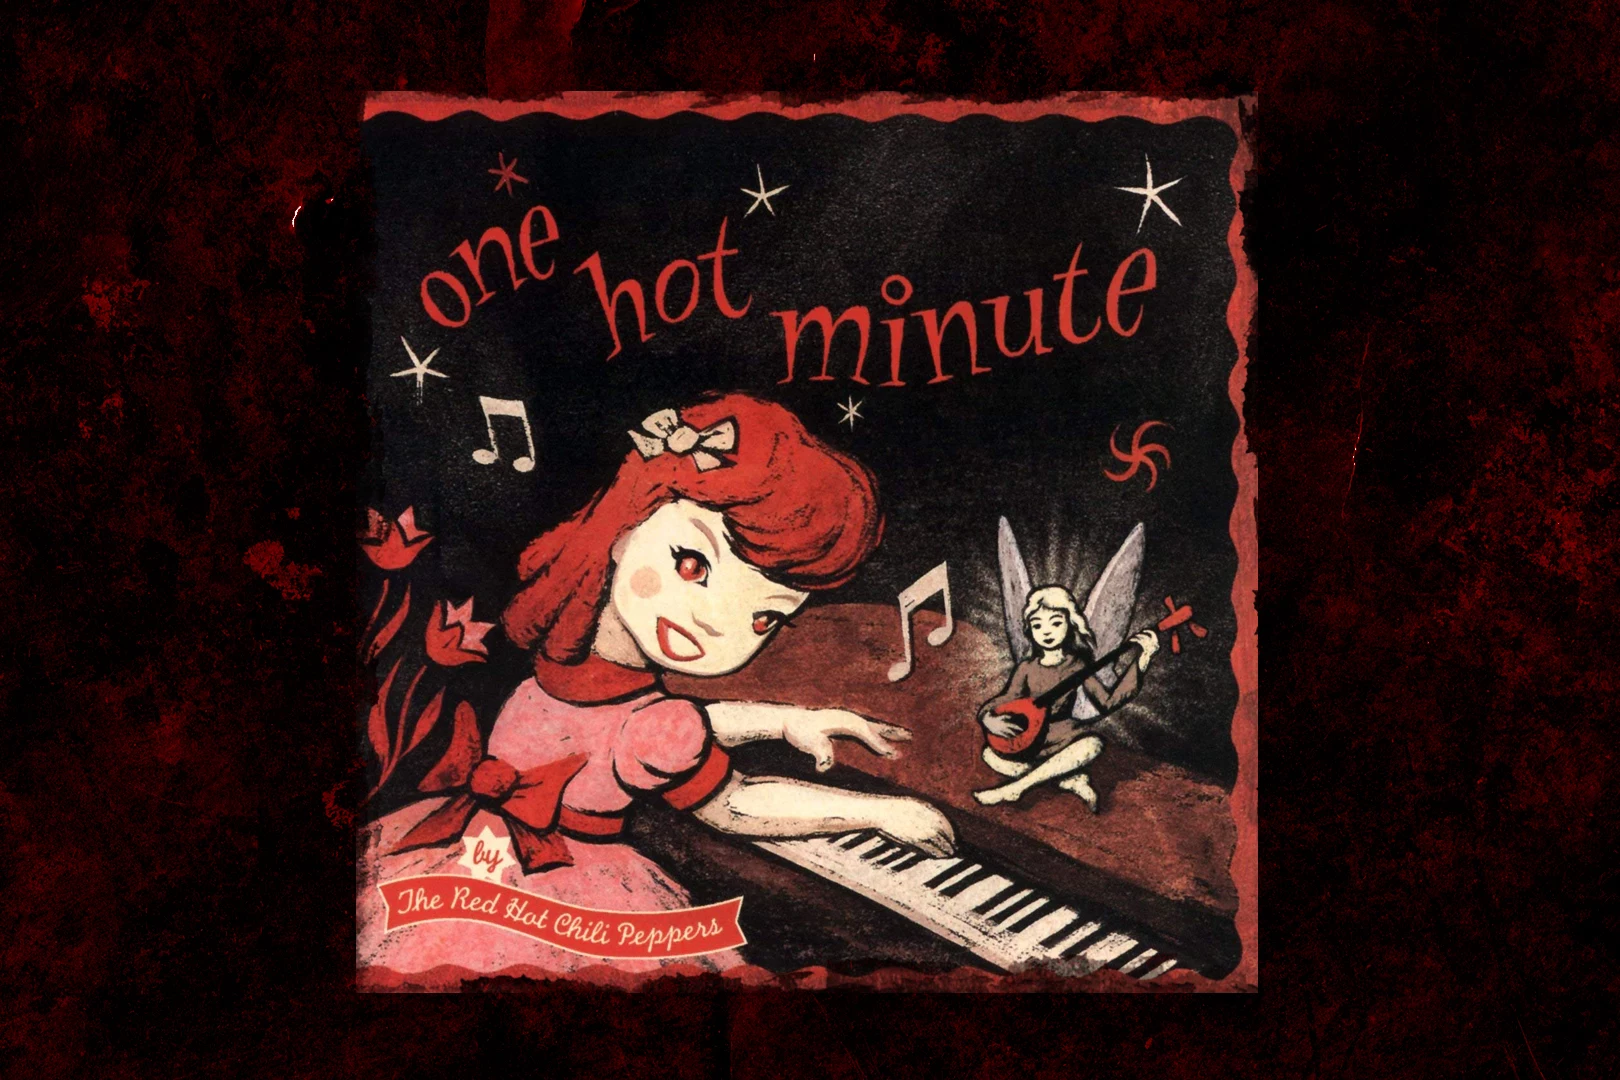 27 Years Ago: Red Hot Chili Peppers Release 'One Hot Minute'